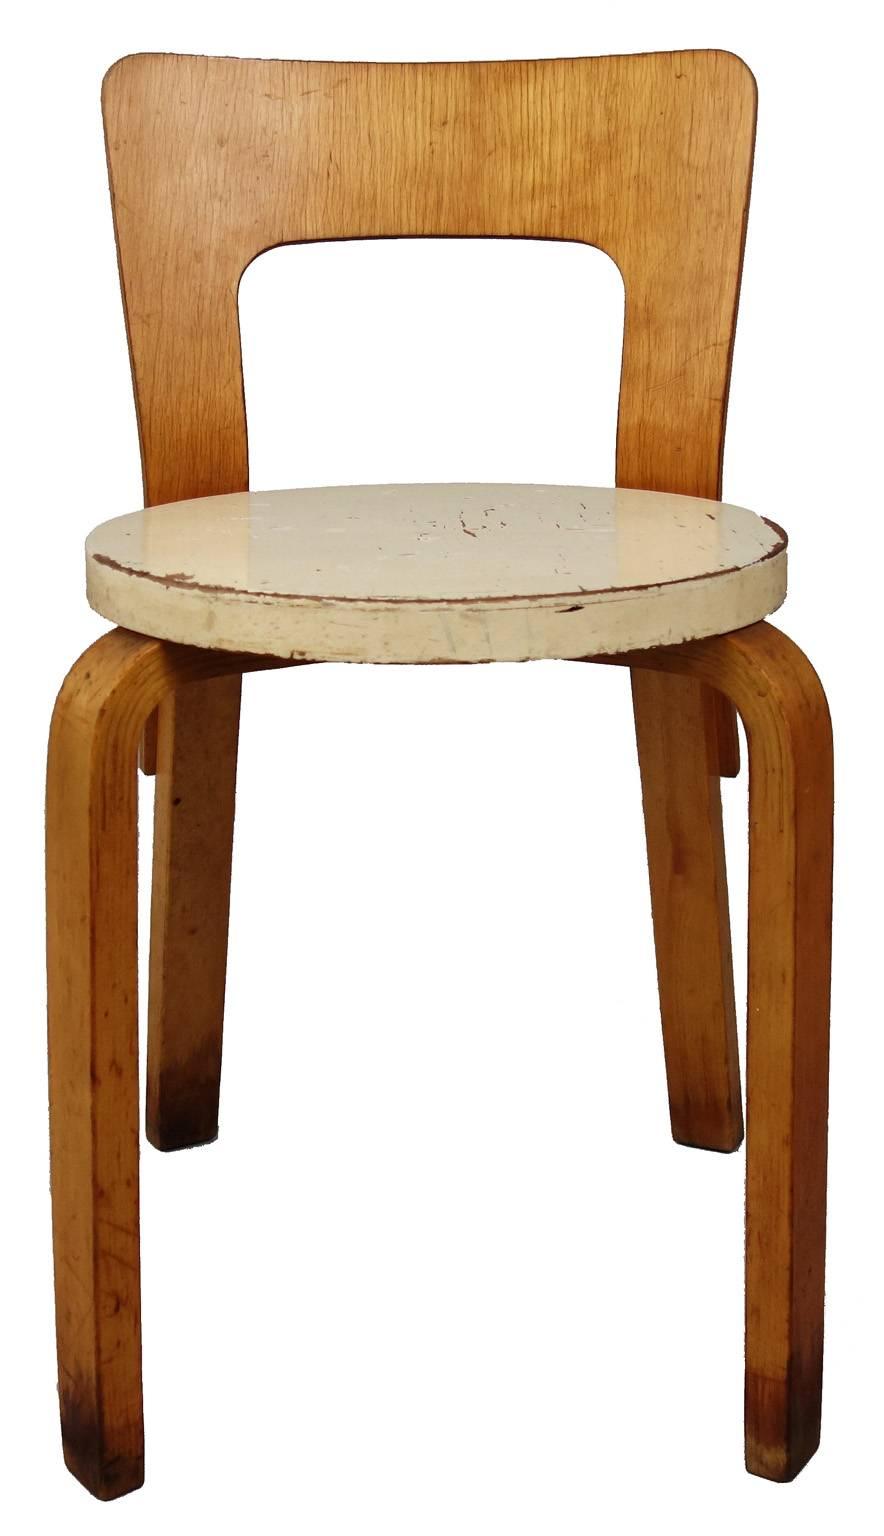 Designed by Alvar Aalto, produced in Sweden by Artek and retailed in the United States by Finsven in New York. Amazing patina and shows beautifully.